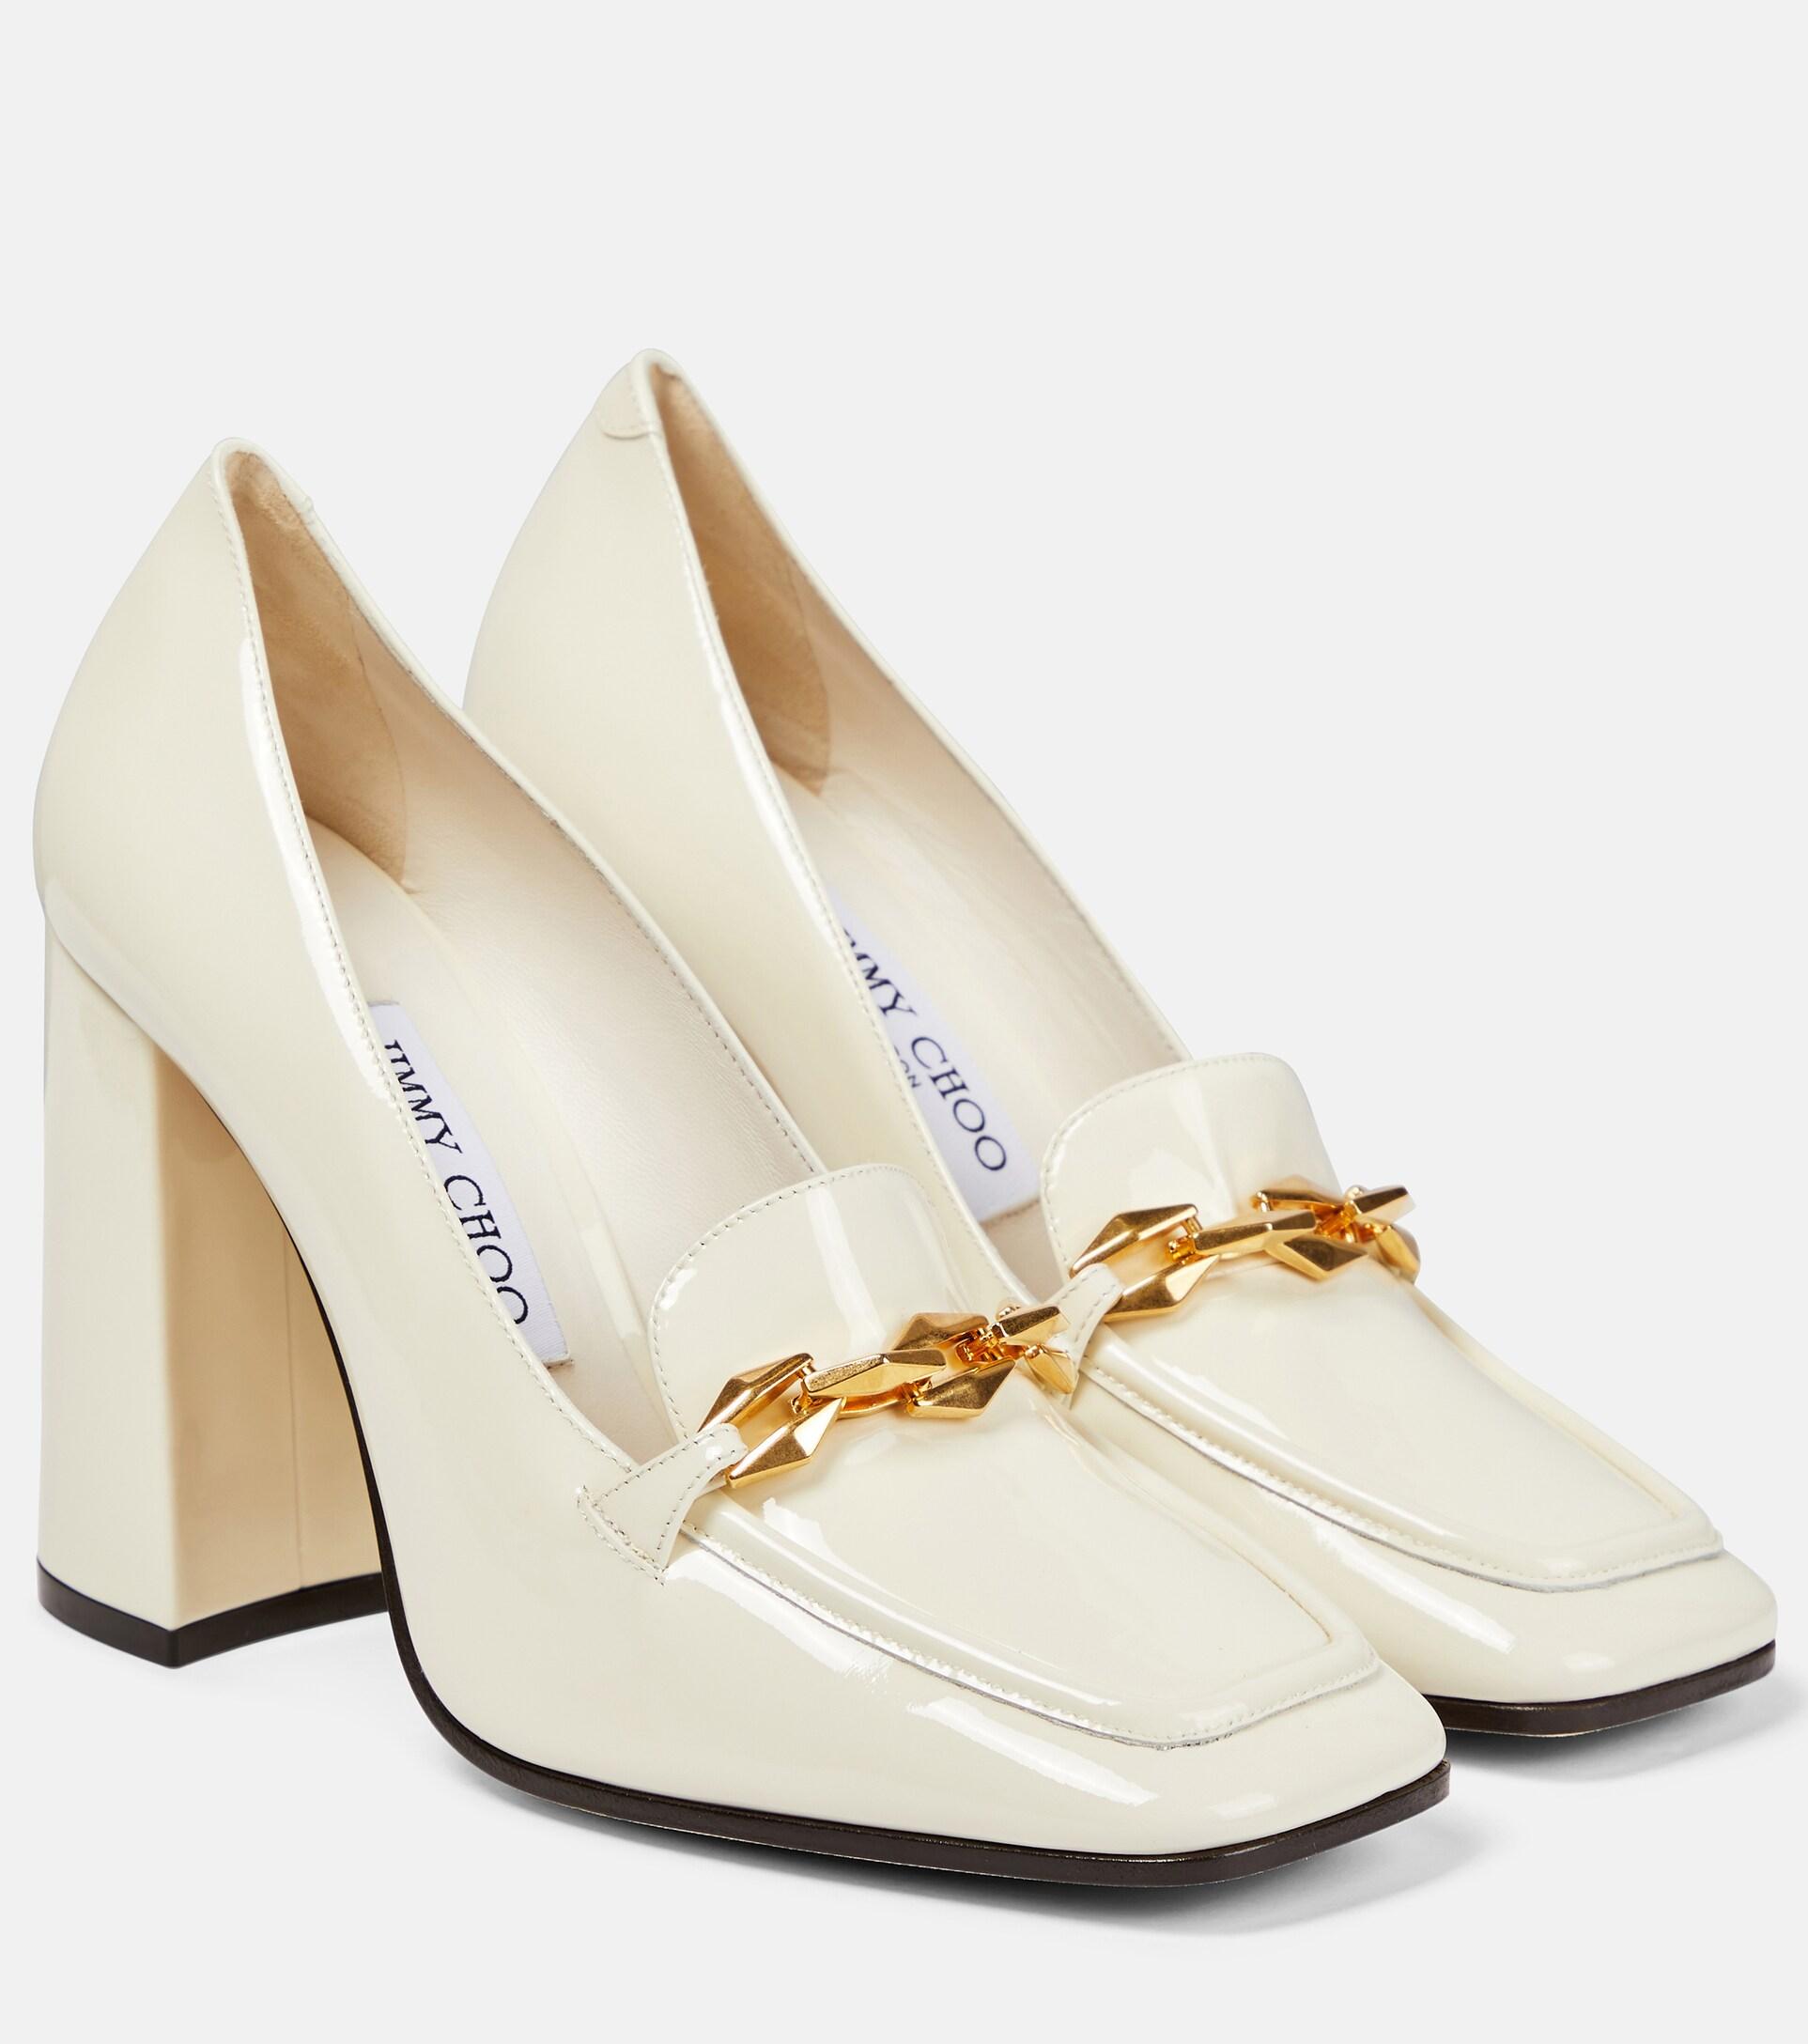 Jimmy Choo Diamond Tilda Leather Loafer Pumps in White | Lyst